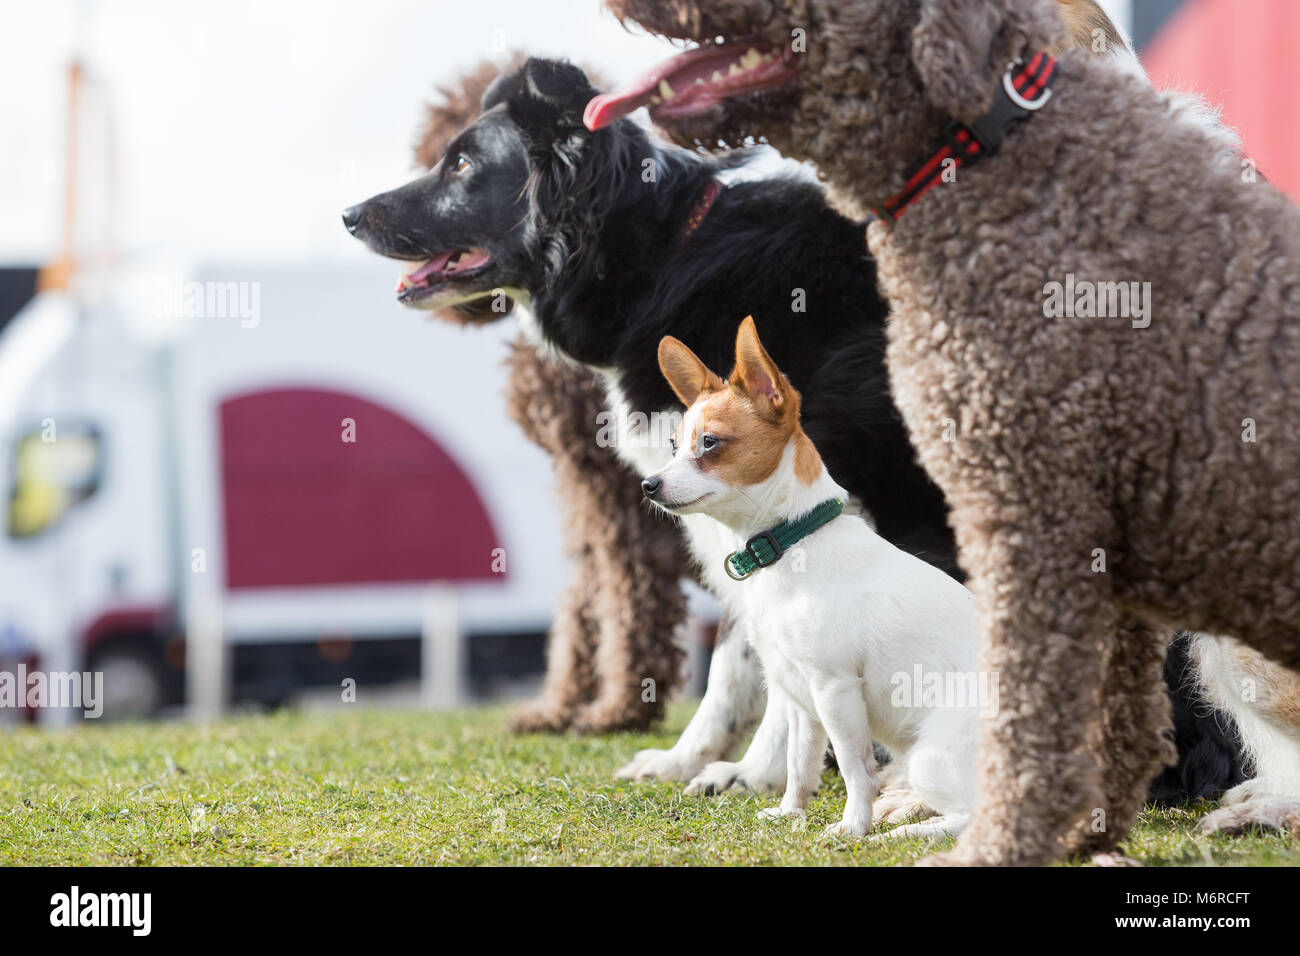 Small dog with large dogs, Papillon and Jack Russell cross Stock Photo